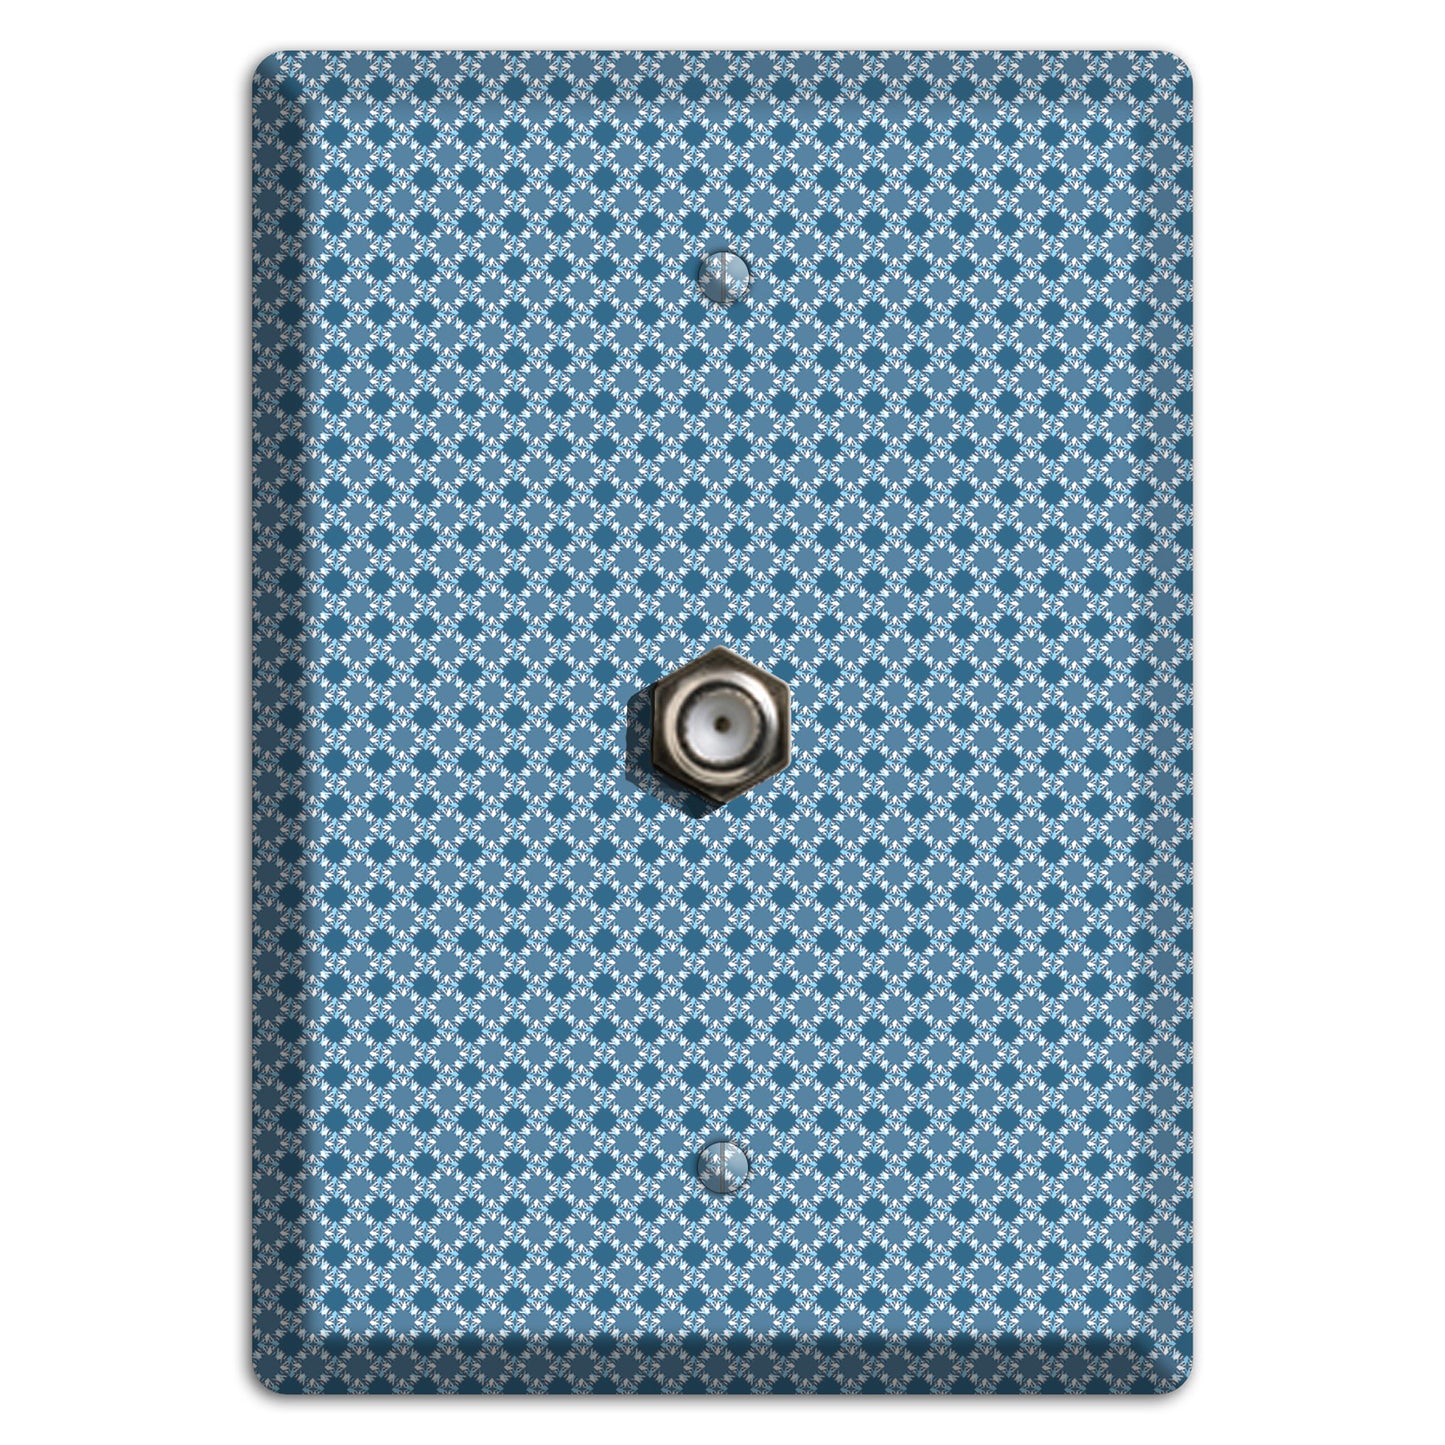 Multi Blue Checkered Foulard Cable Wallplate